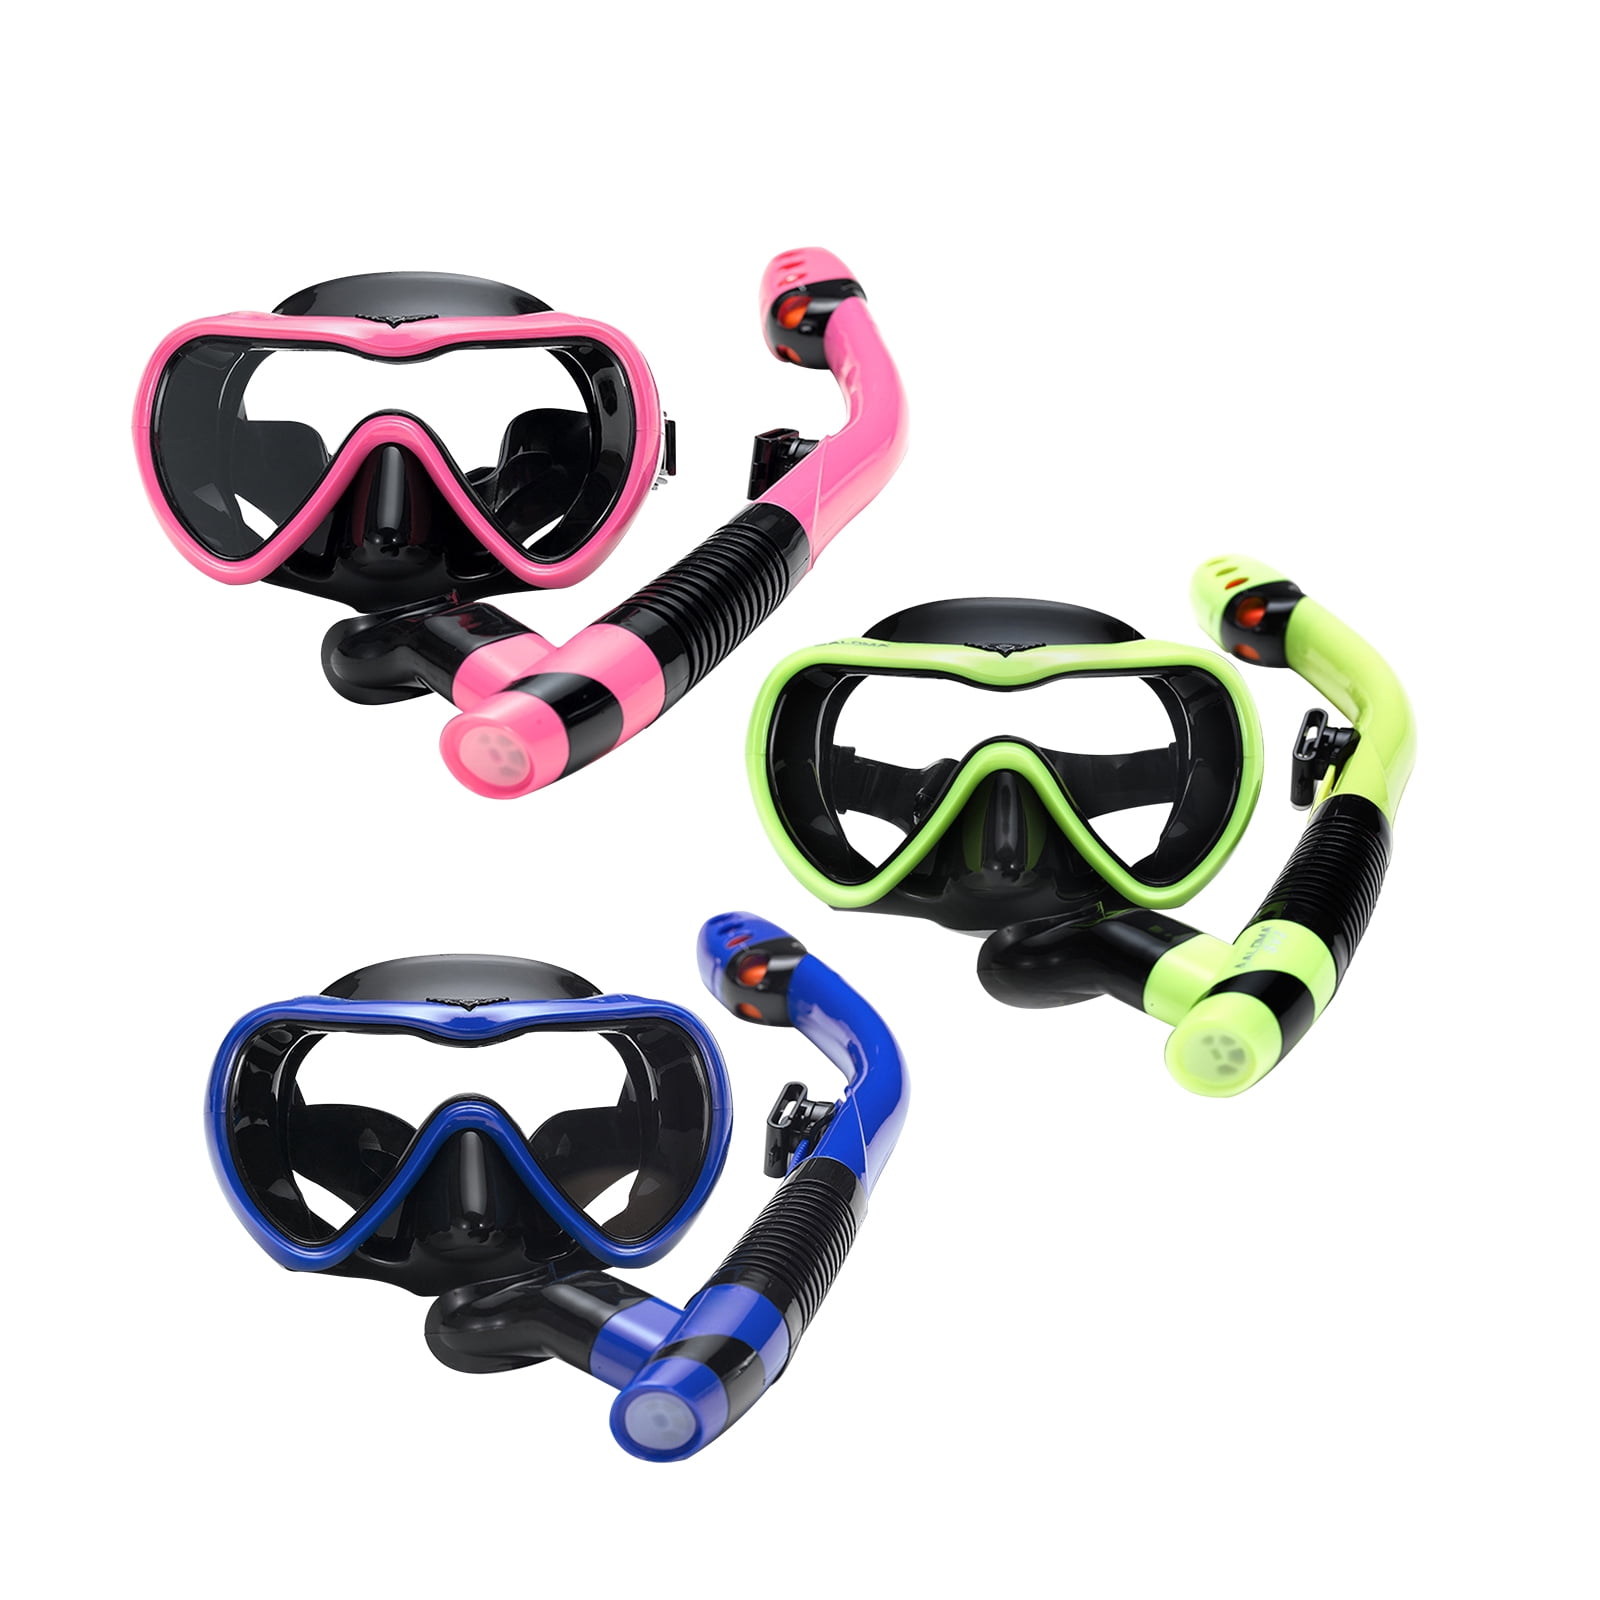 Details about   Adjustable Free Diving Goggles Anti-fog Waterproof Snorkeling Scuba Dive Mask 